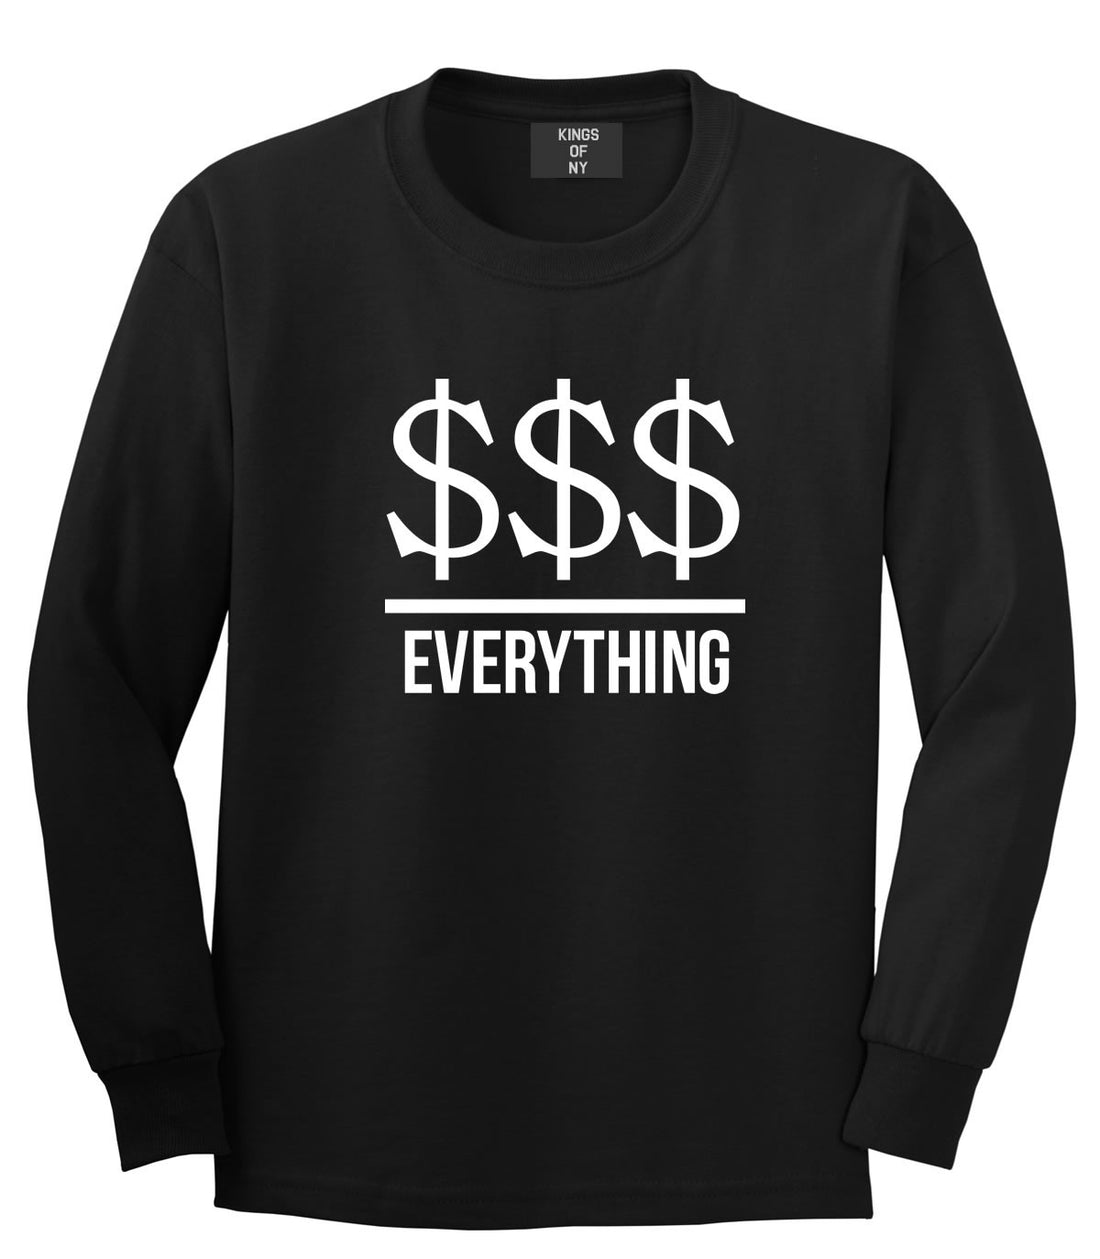 Kings Of NY Money Over Everything Long Sleeve T-Shirt in Black